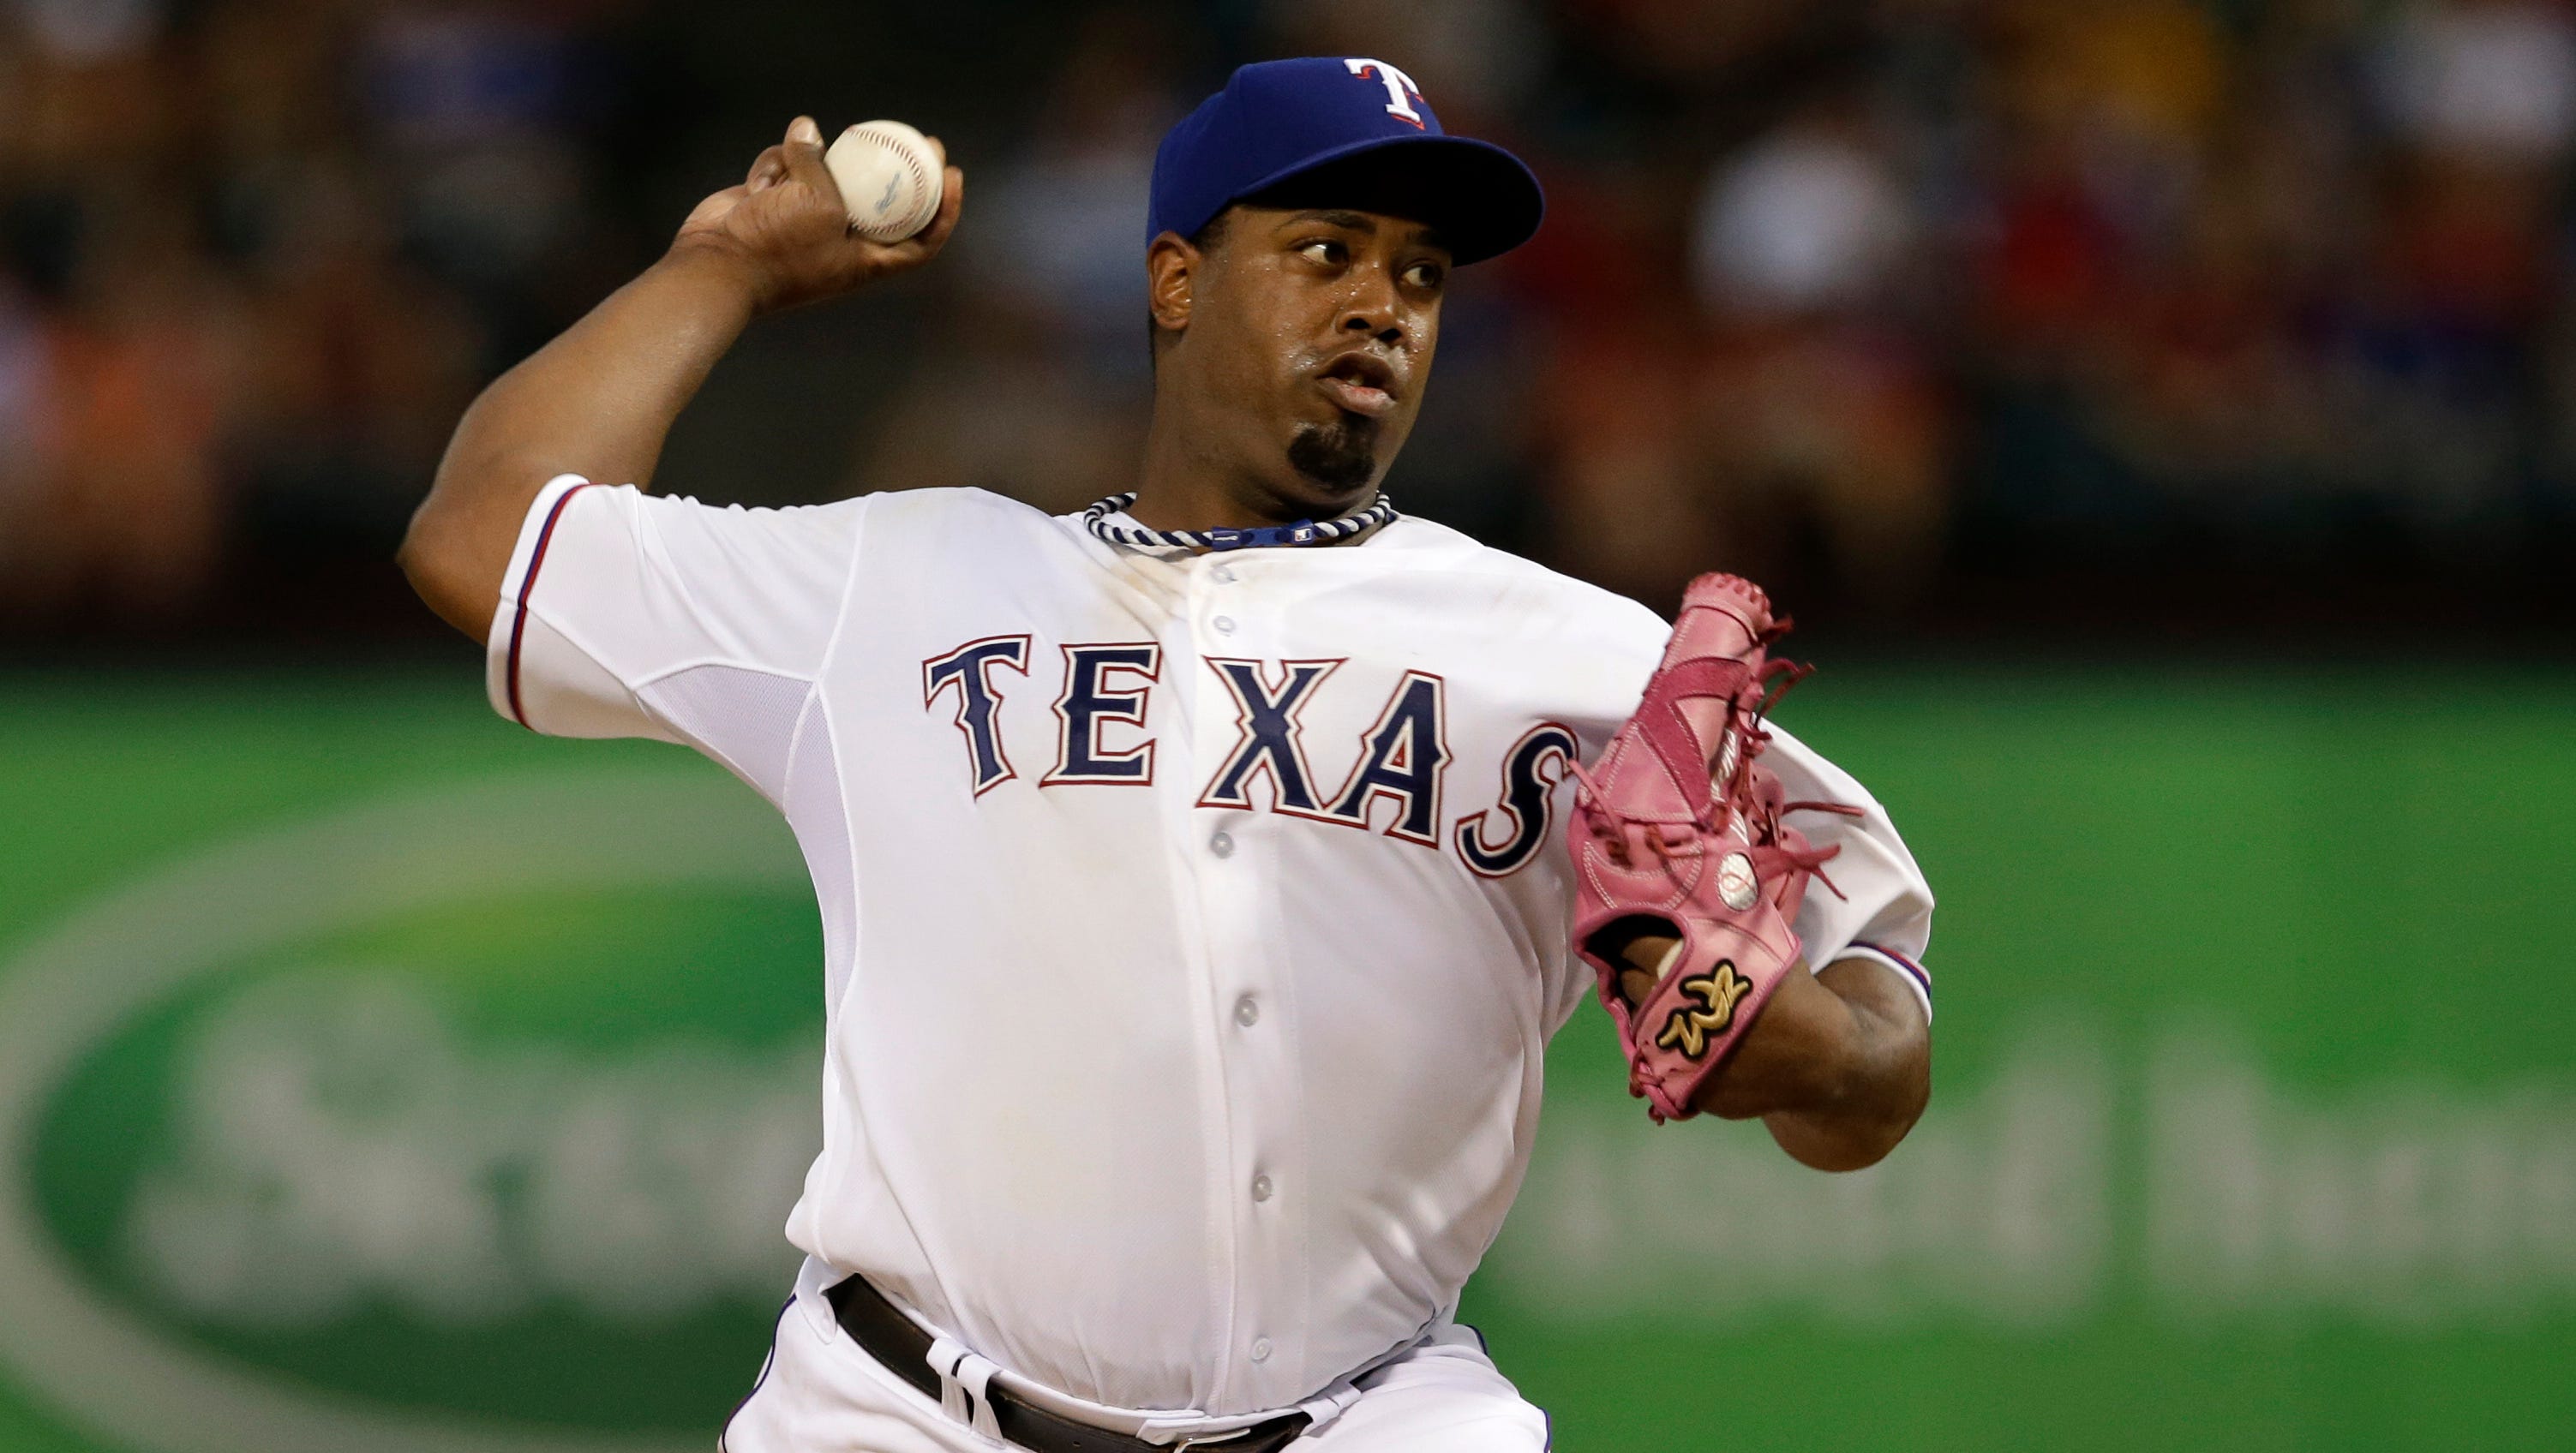 Rangers use pitcher, A's 4-1